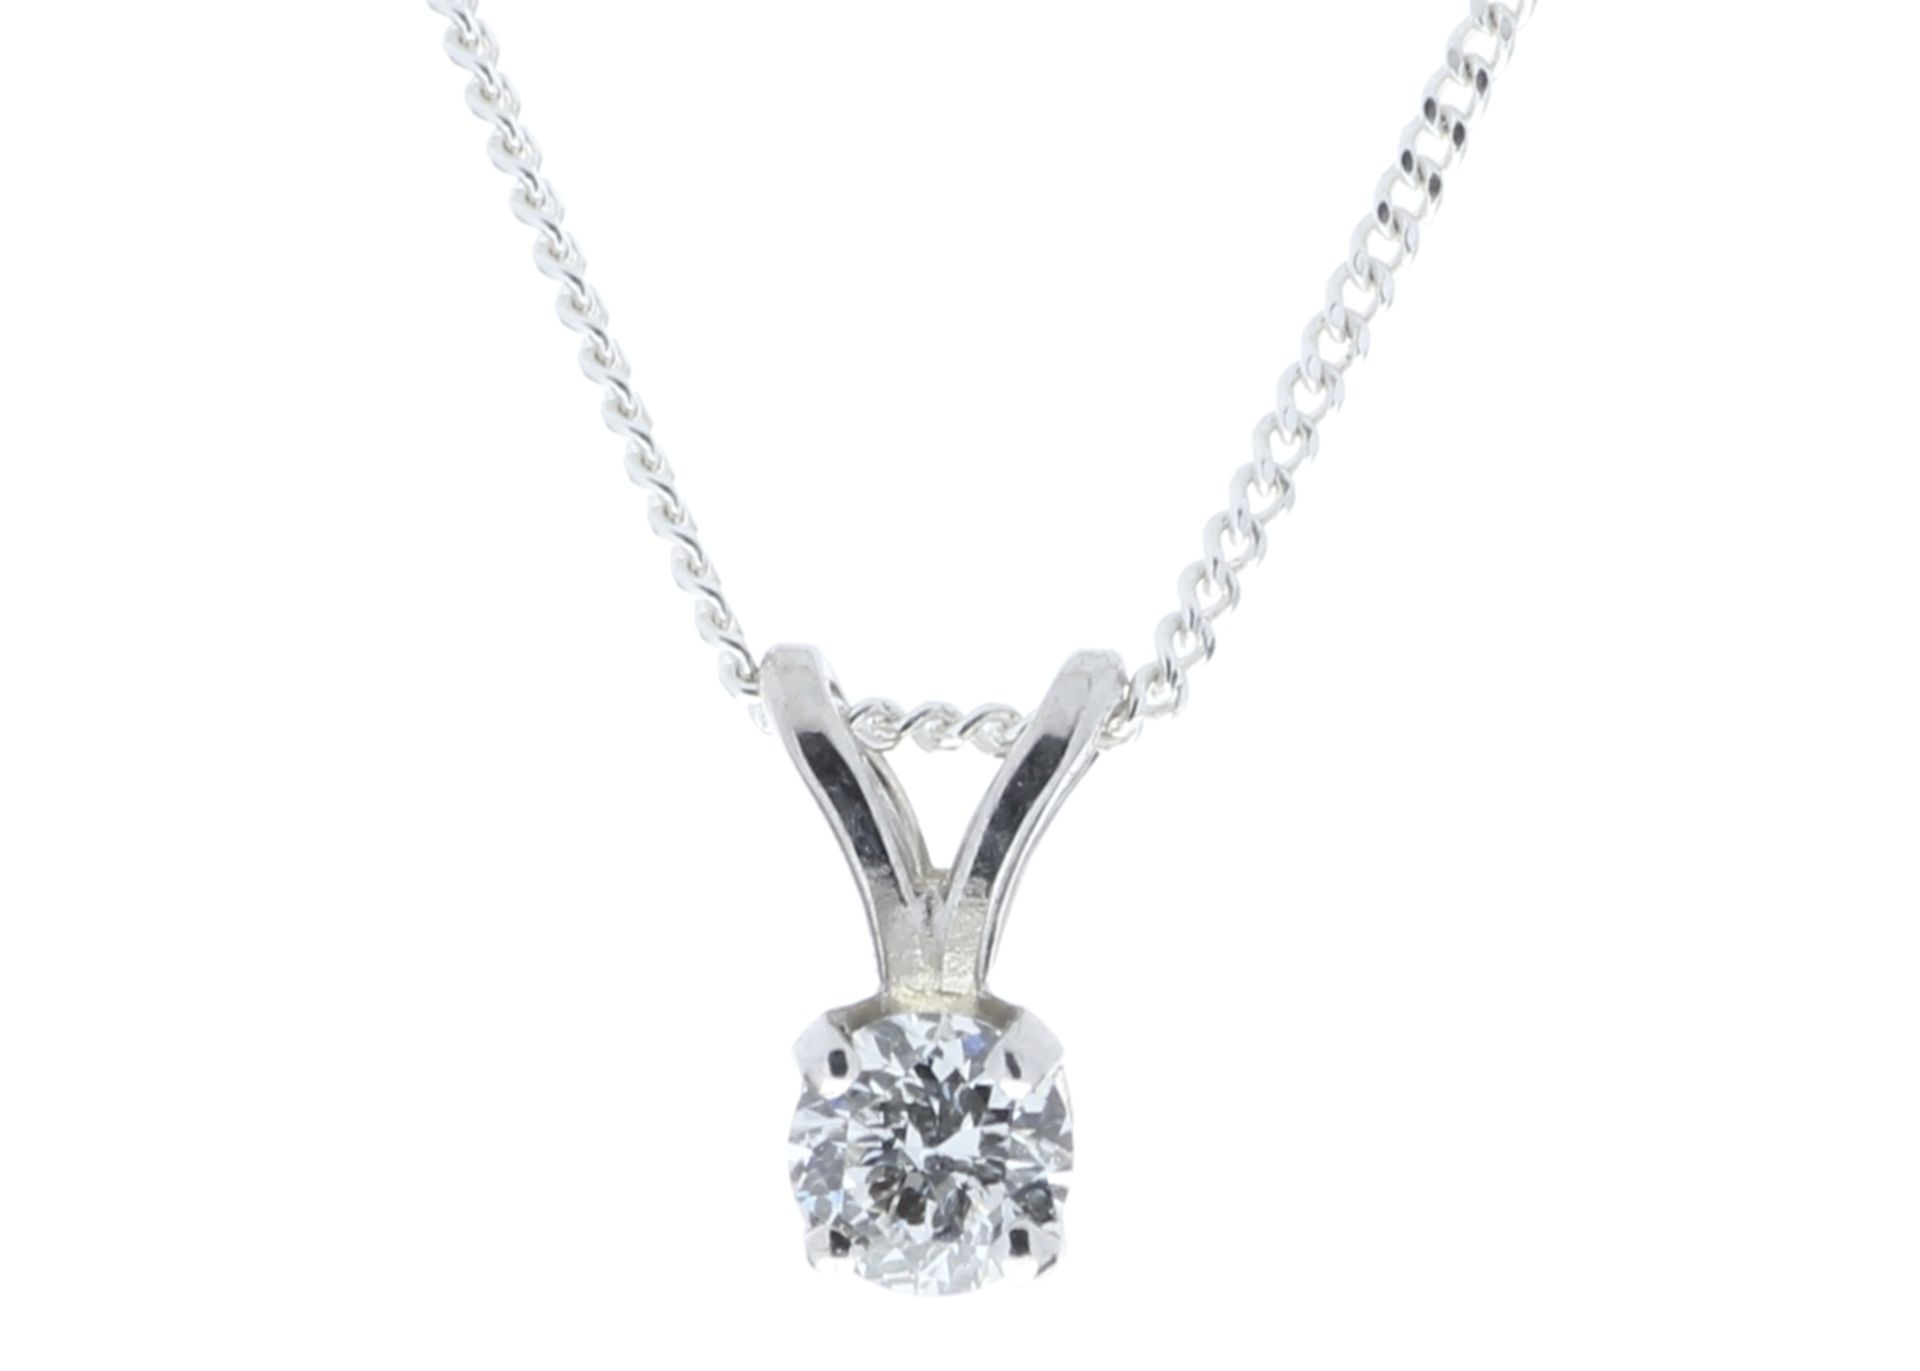 9ct White Gold Single Stone Claw Set Diamond Pendant 0.15 Carats - Valued By GIE £2,030.00 - A